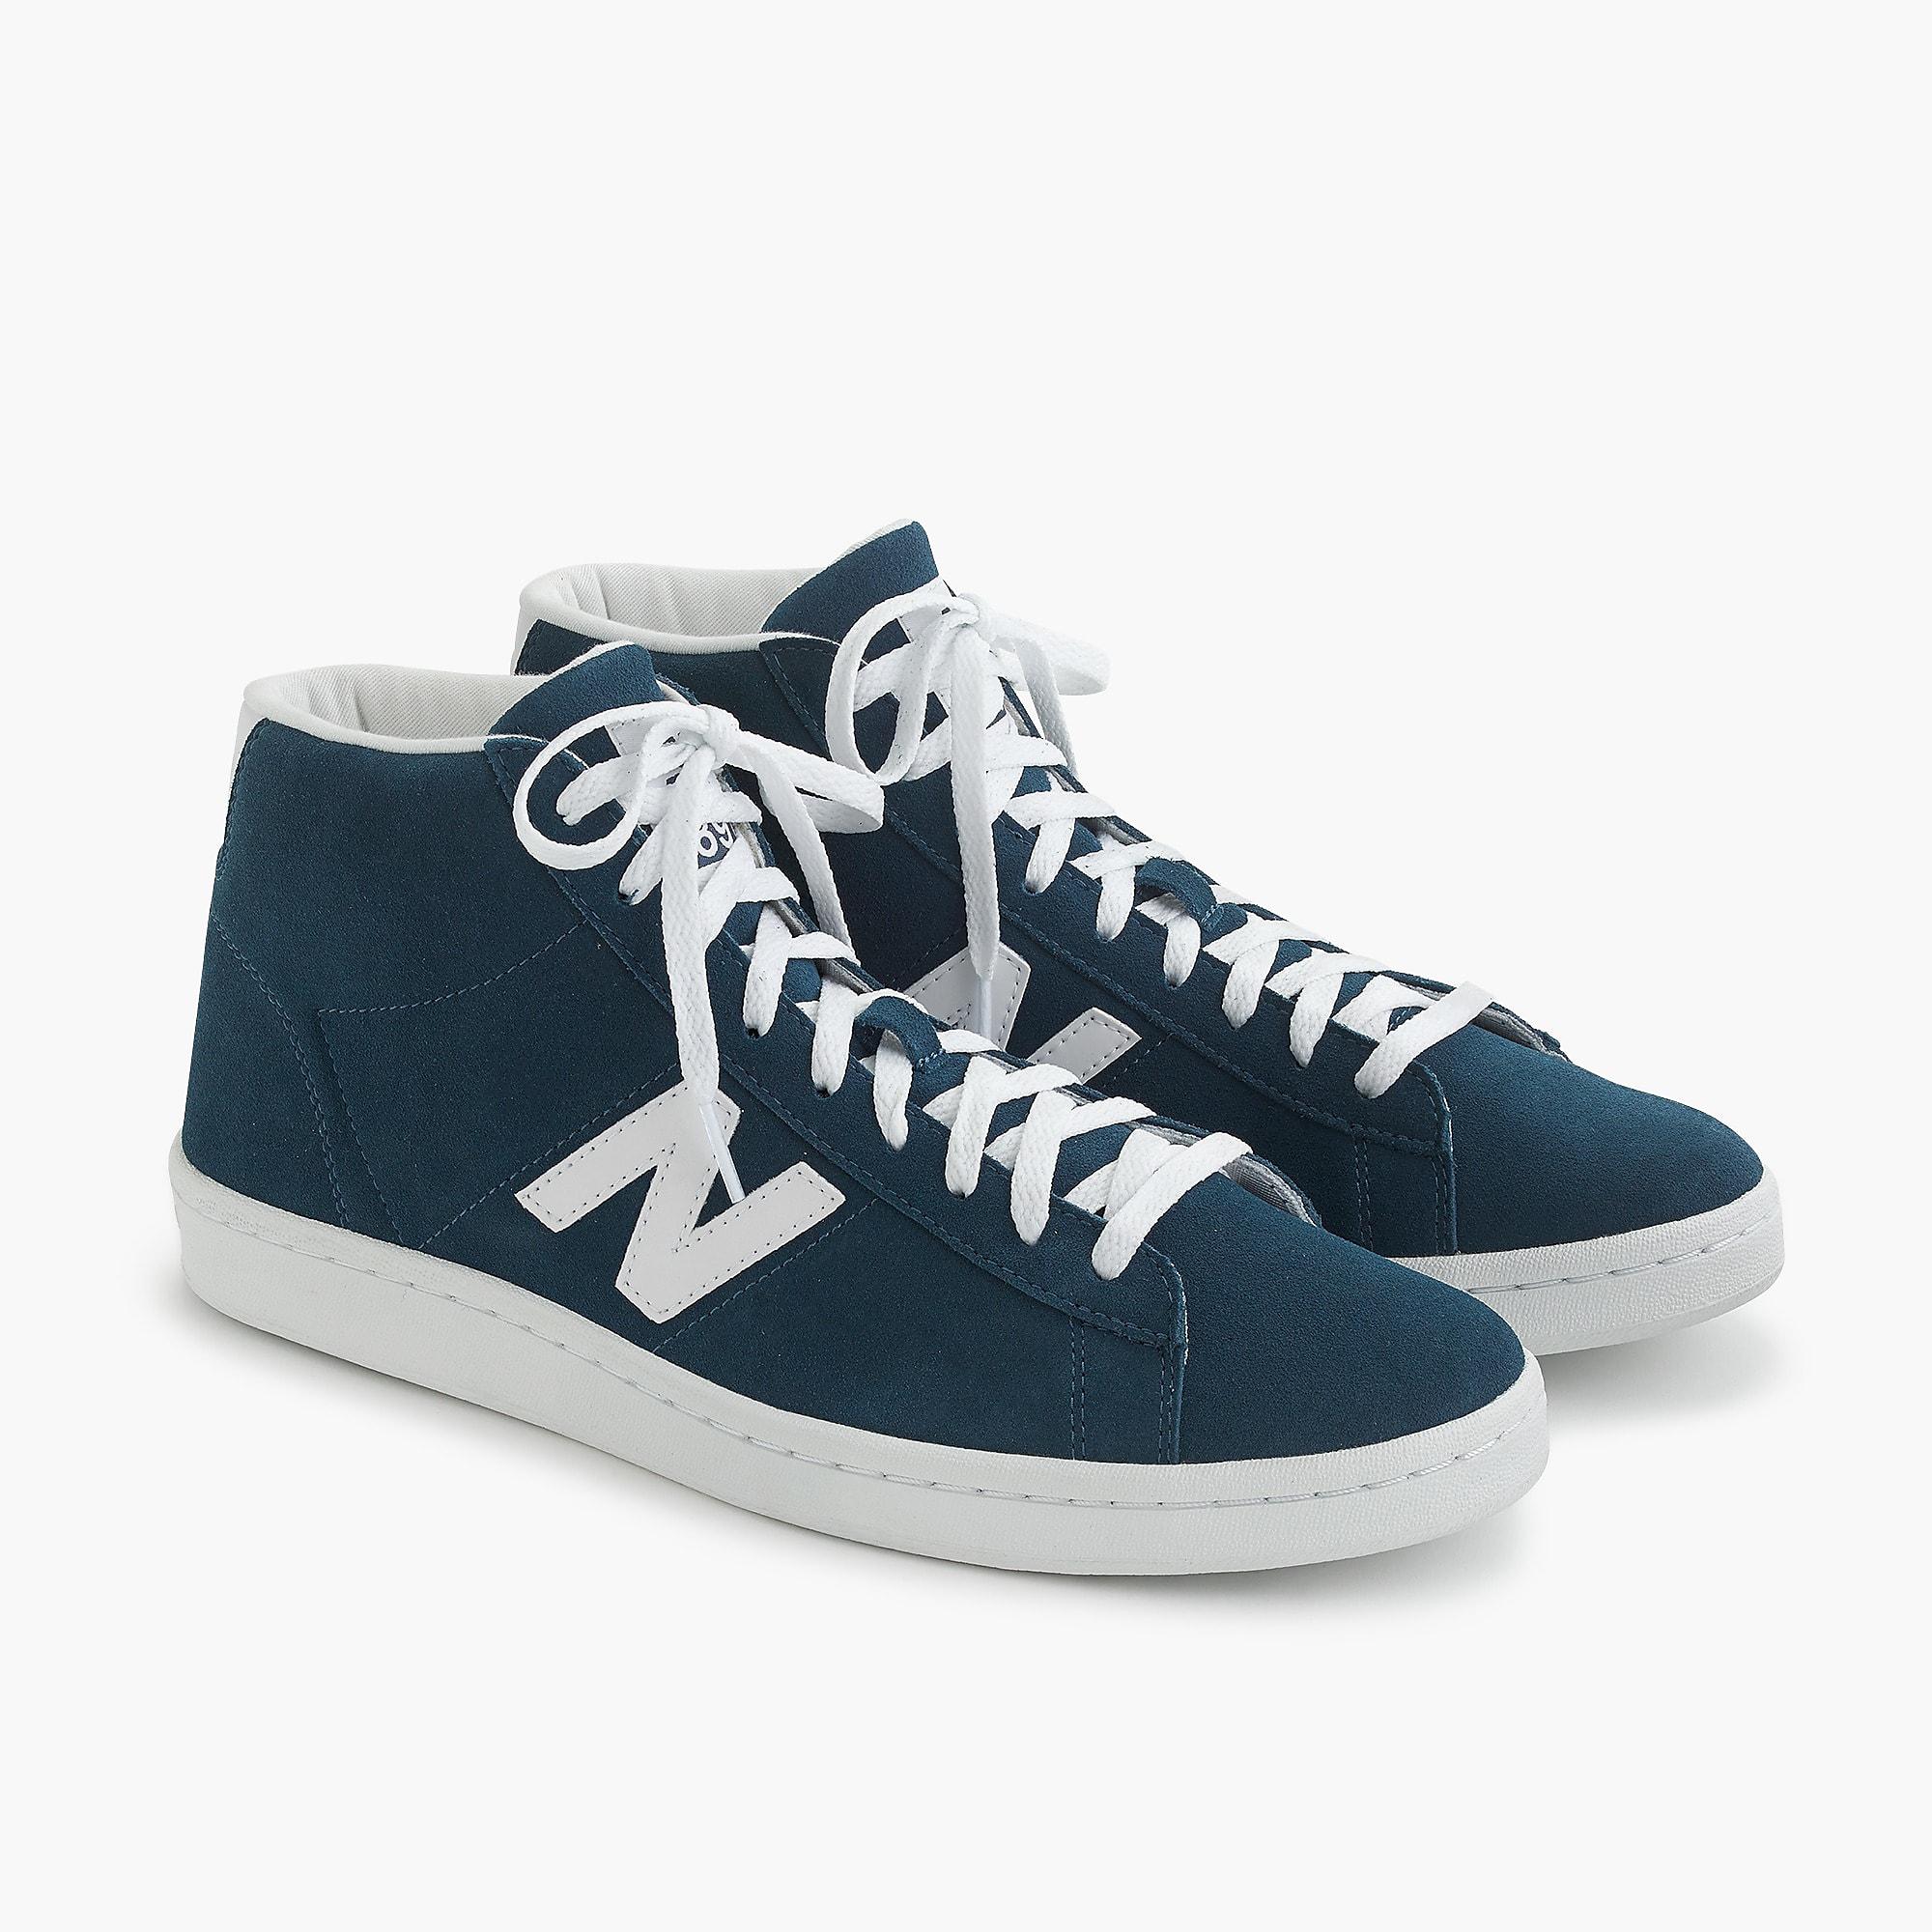 New Balance Suede 891 High-top Sneakers 